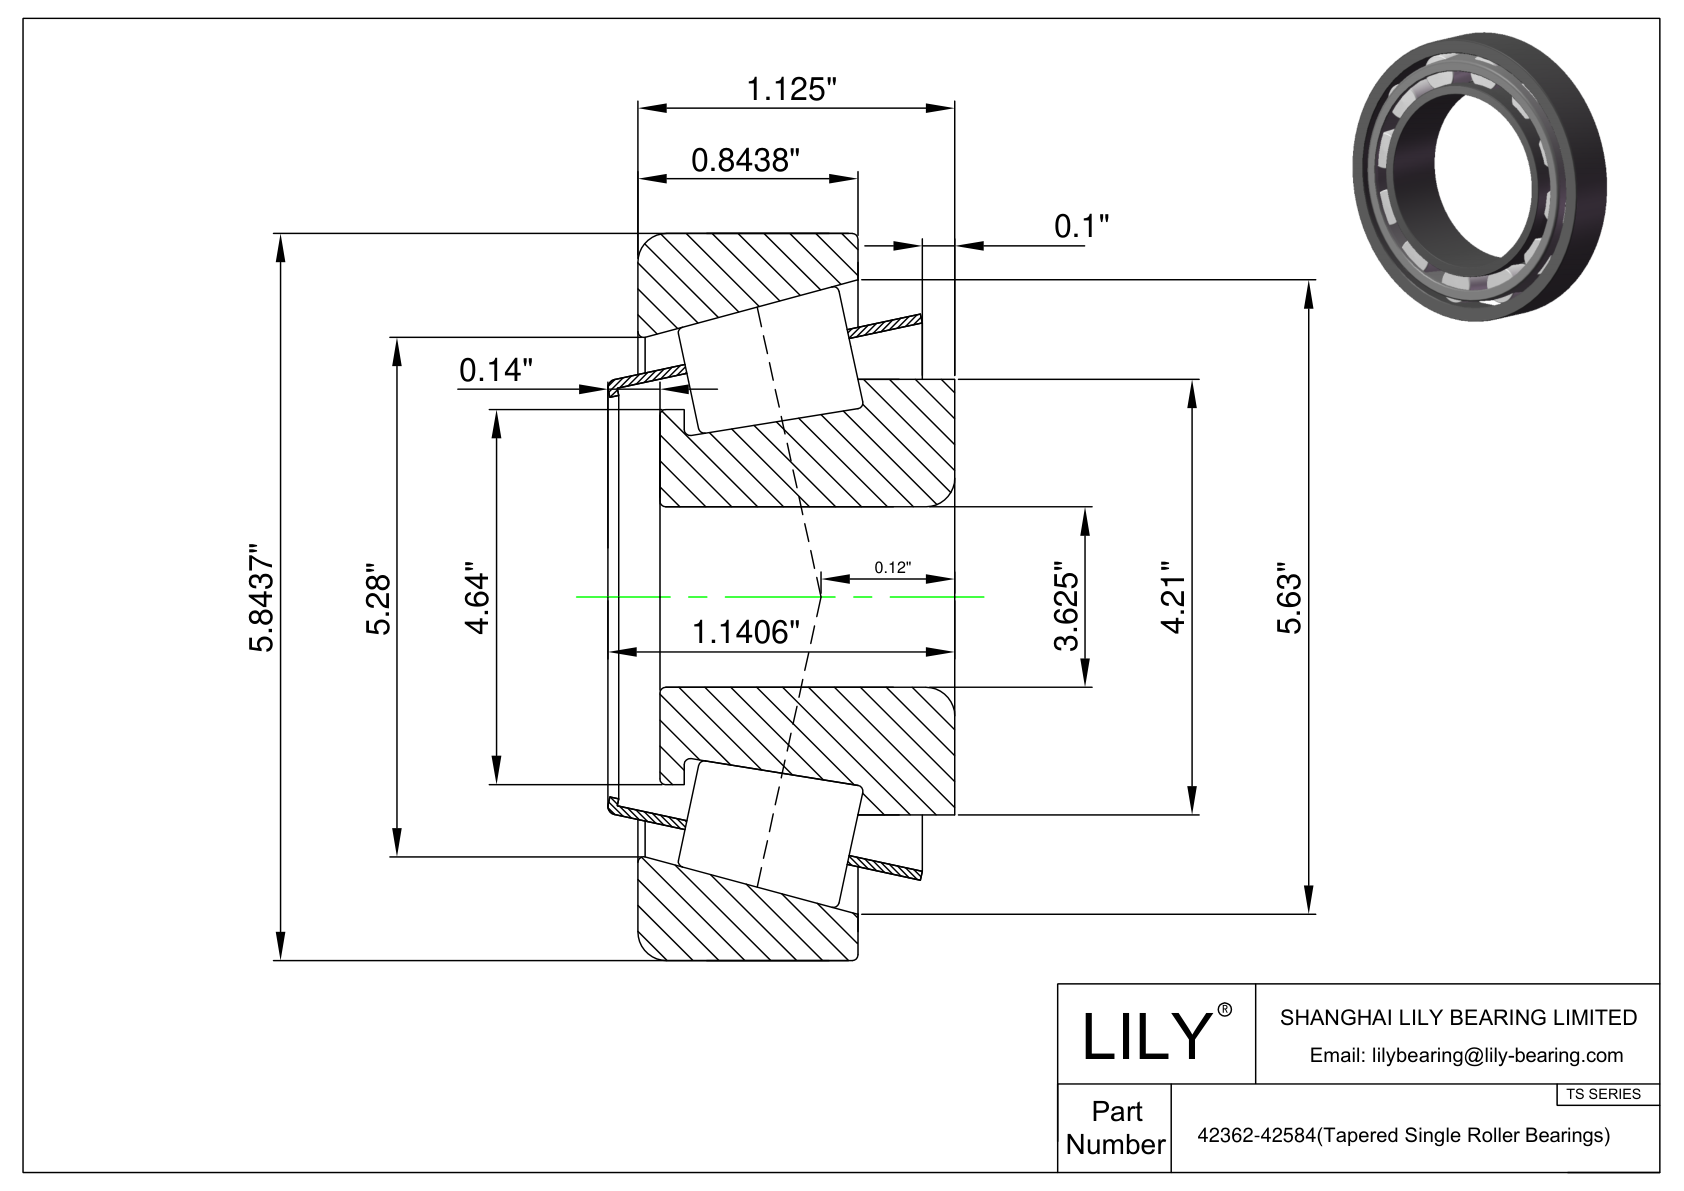 42362-42584 TS (Tapered Single Roller Bearings) (Imperial) cad drawing